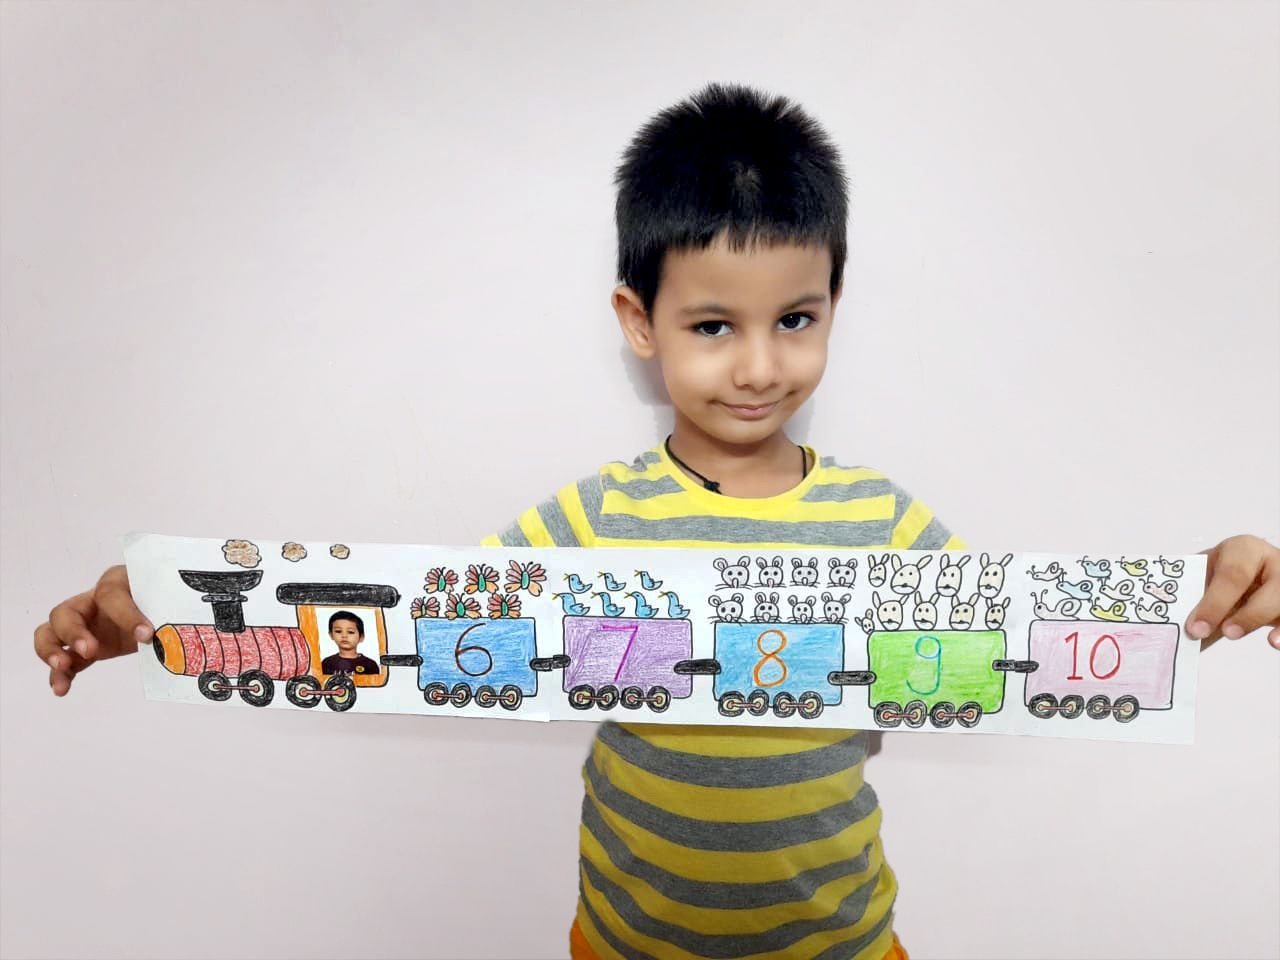 MATHS SKILLS WITH NUMBER TRAIN ACTIVITY